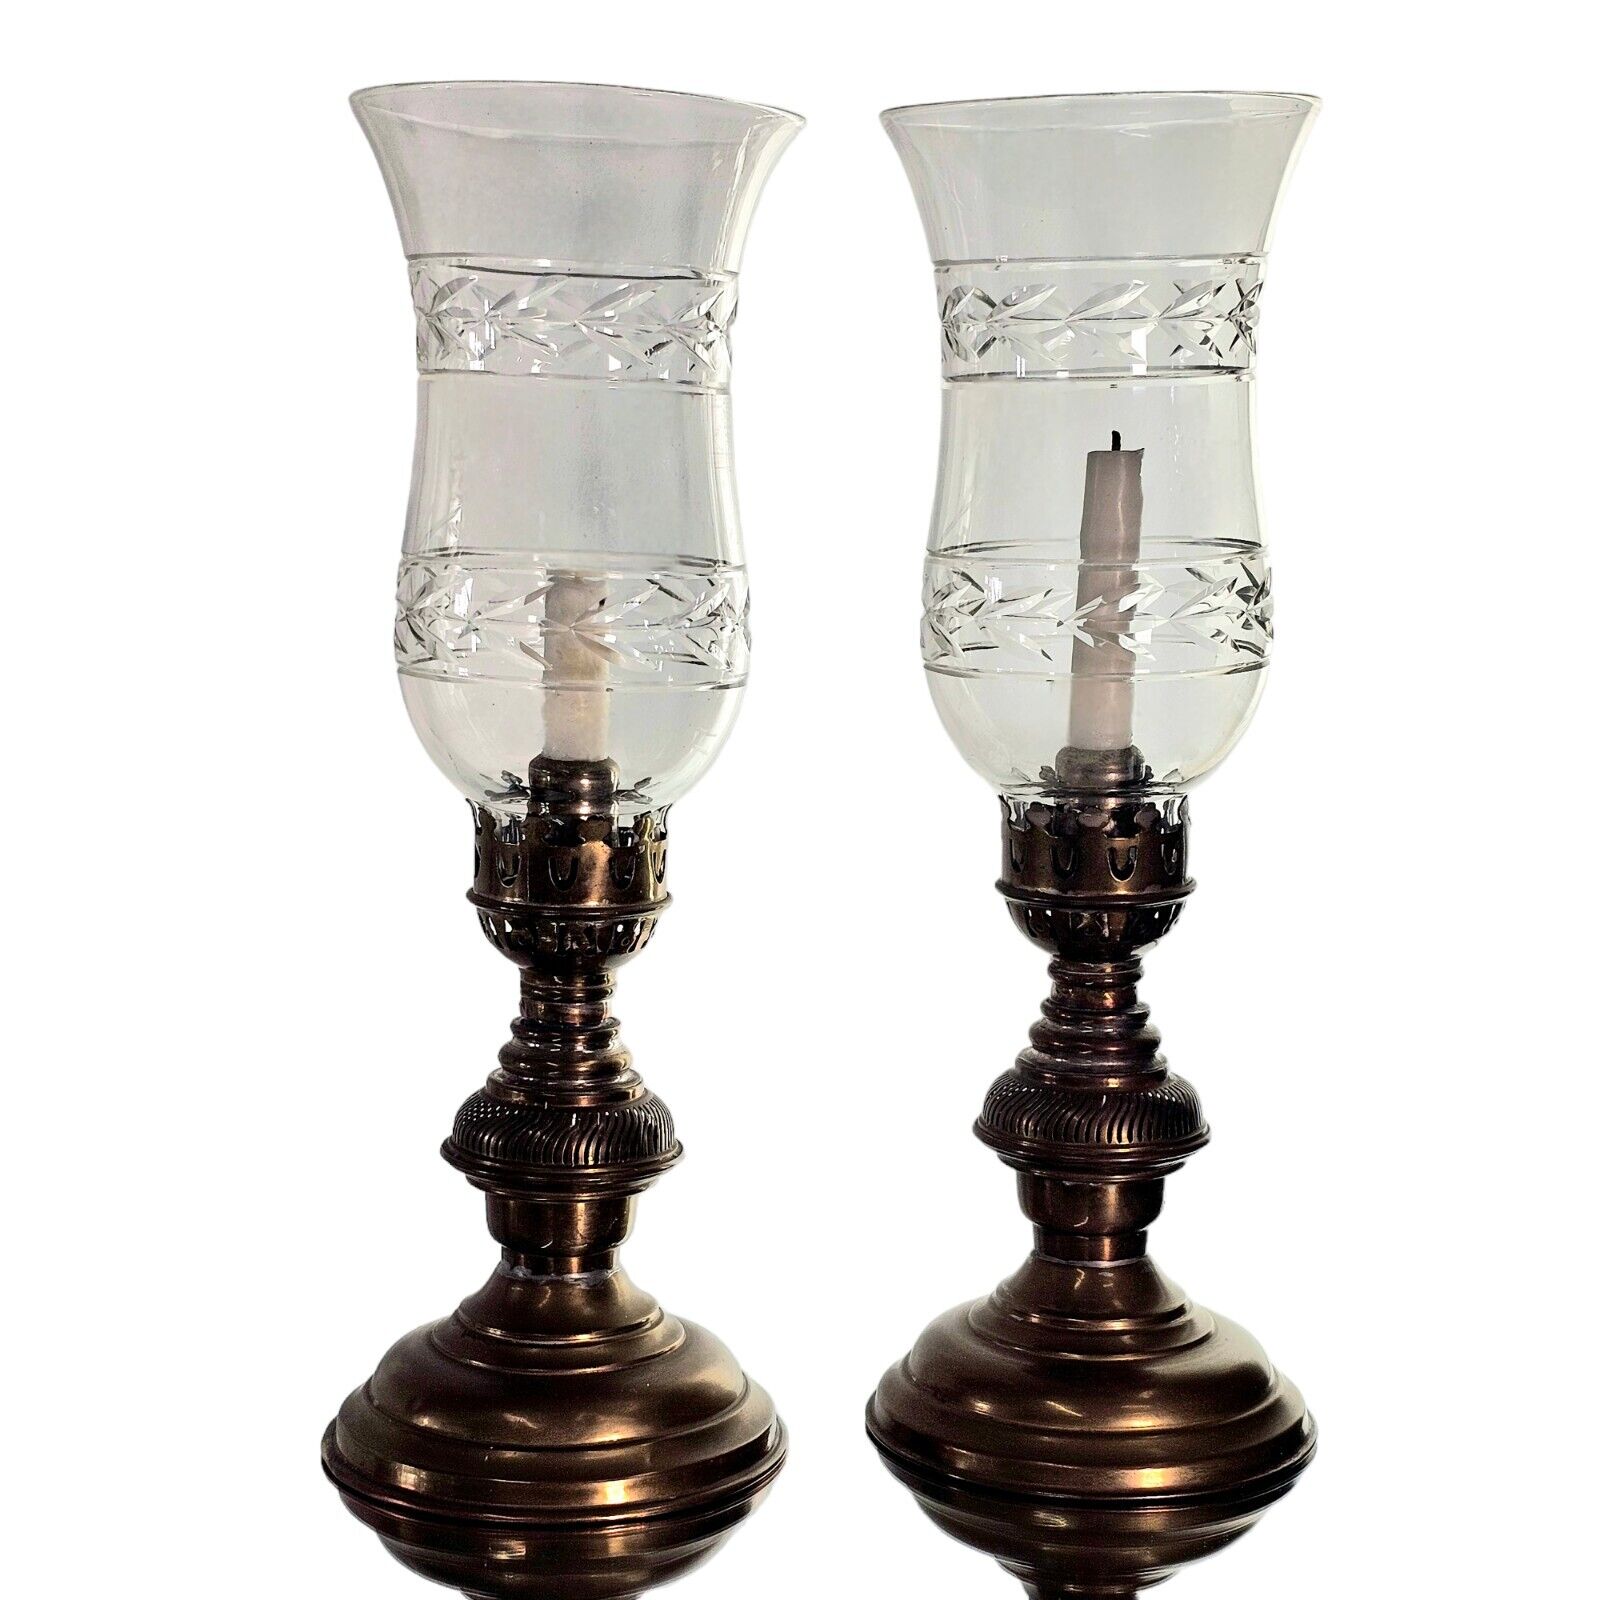 Antique Brass Hurricane Candle Lanterns Candle Holders with Cut Crystal Globes